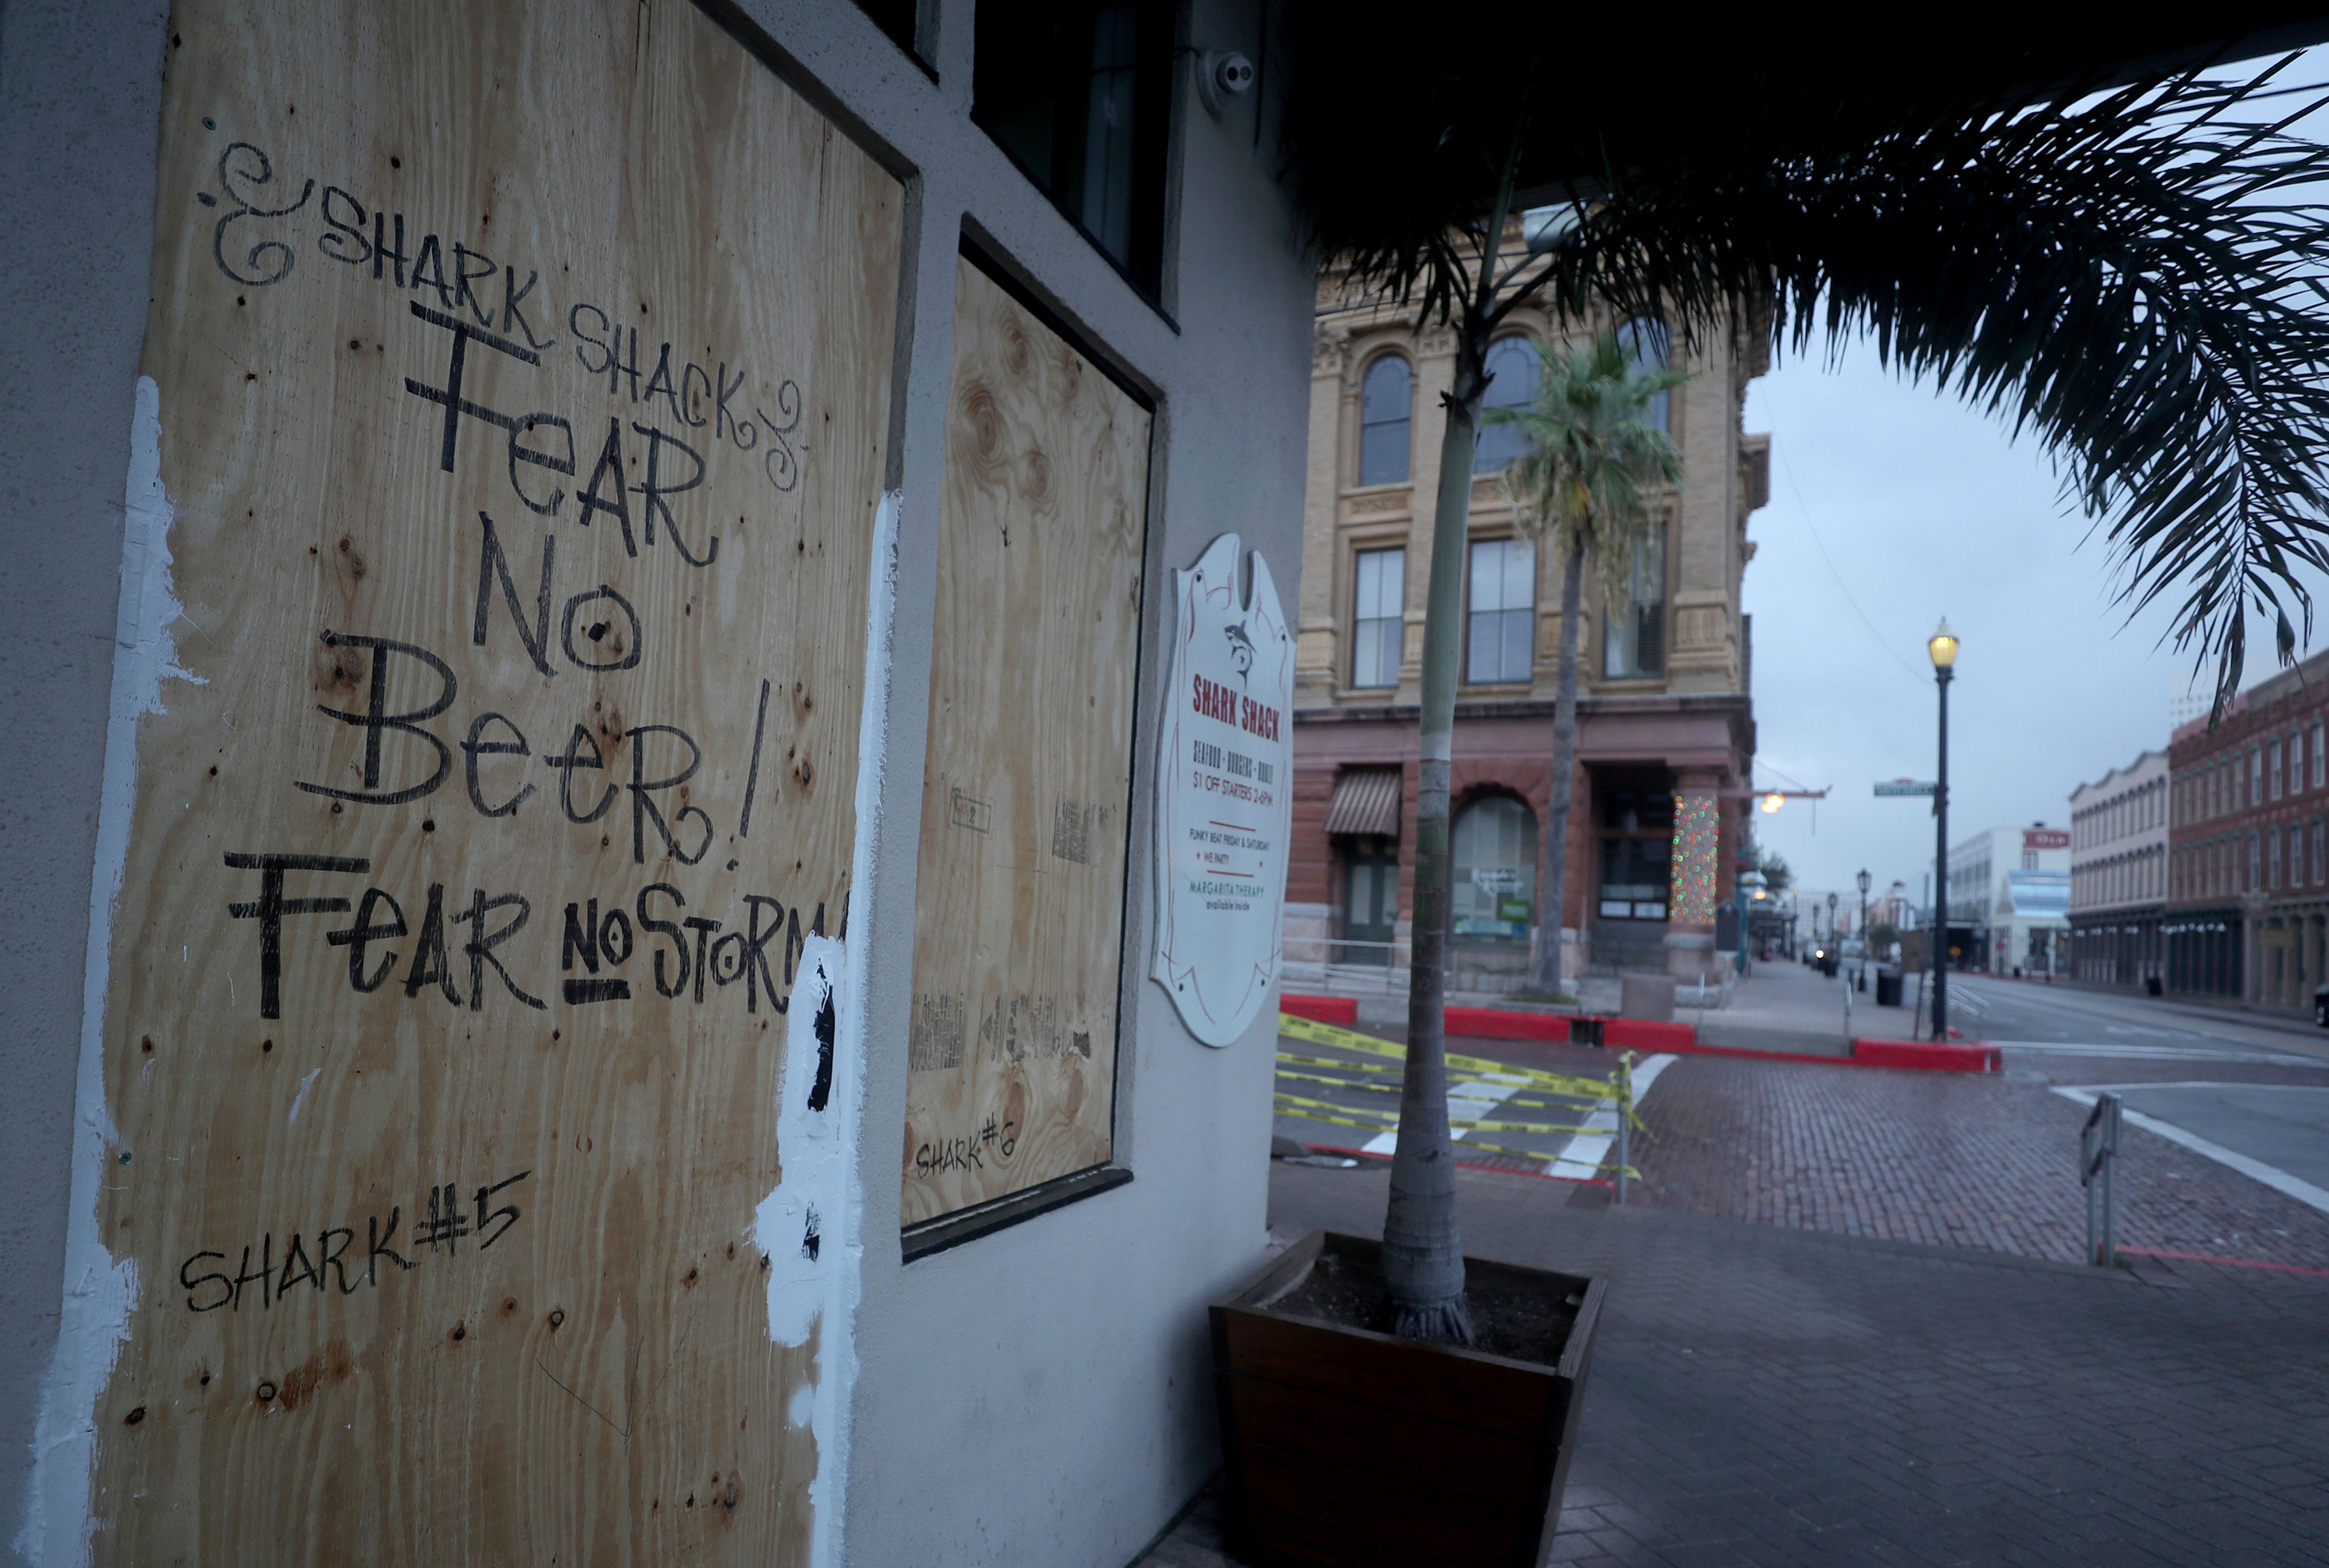 The Shark Shack Beach Bar and Grill is boarded up on the nearly deserted Strand Street in Galveston, Texas, on Wednesday, August 26.